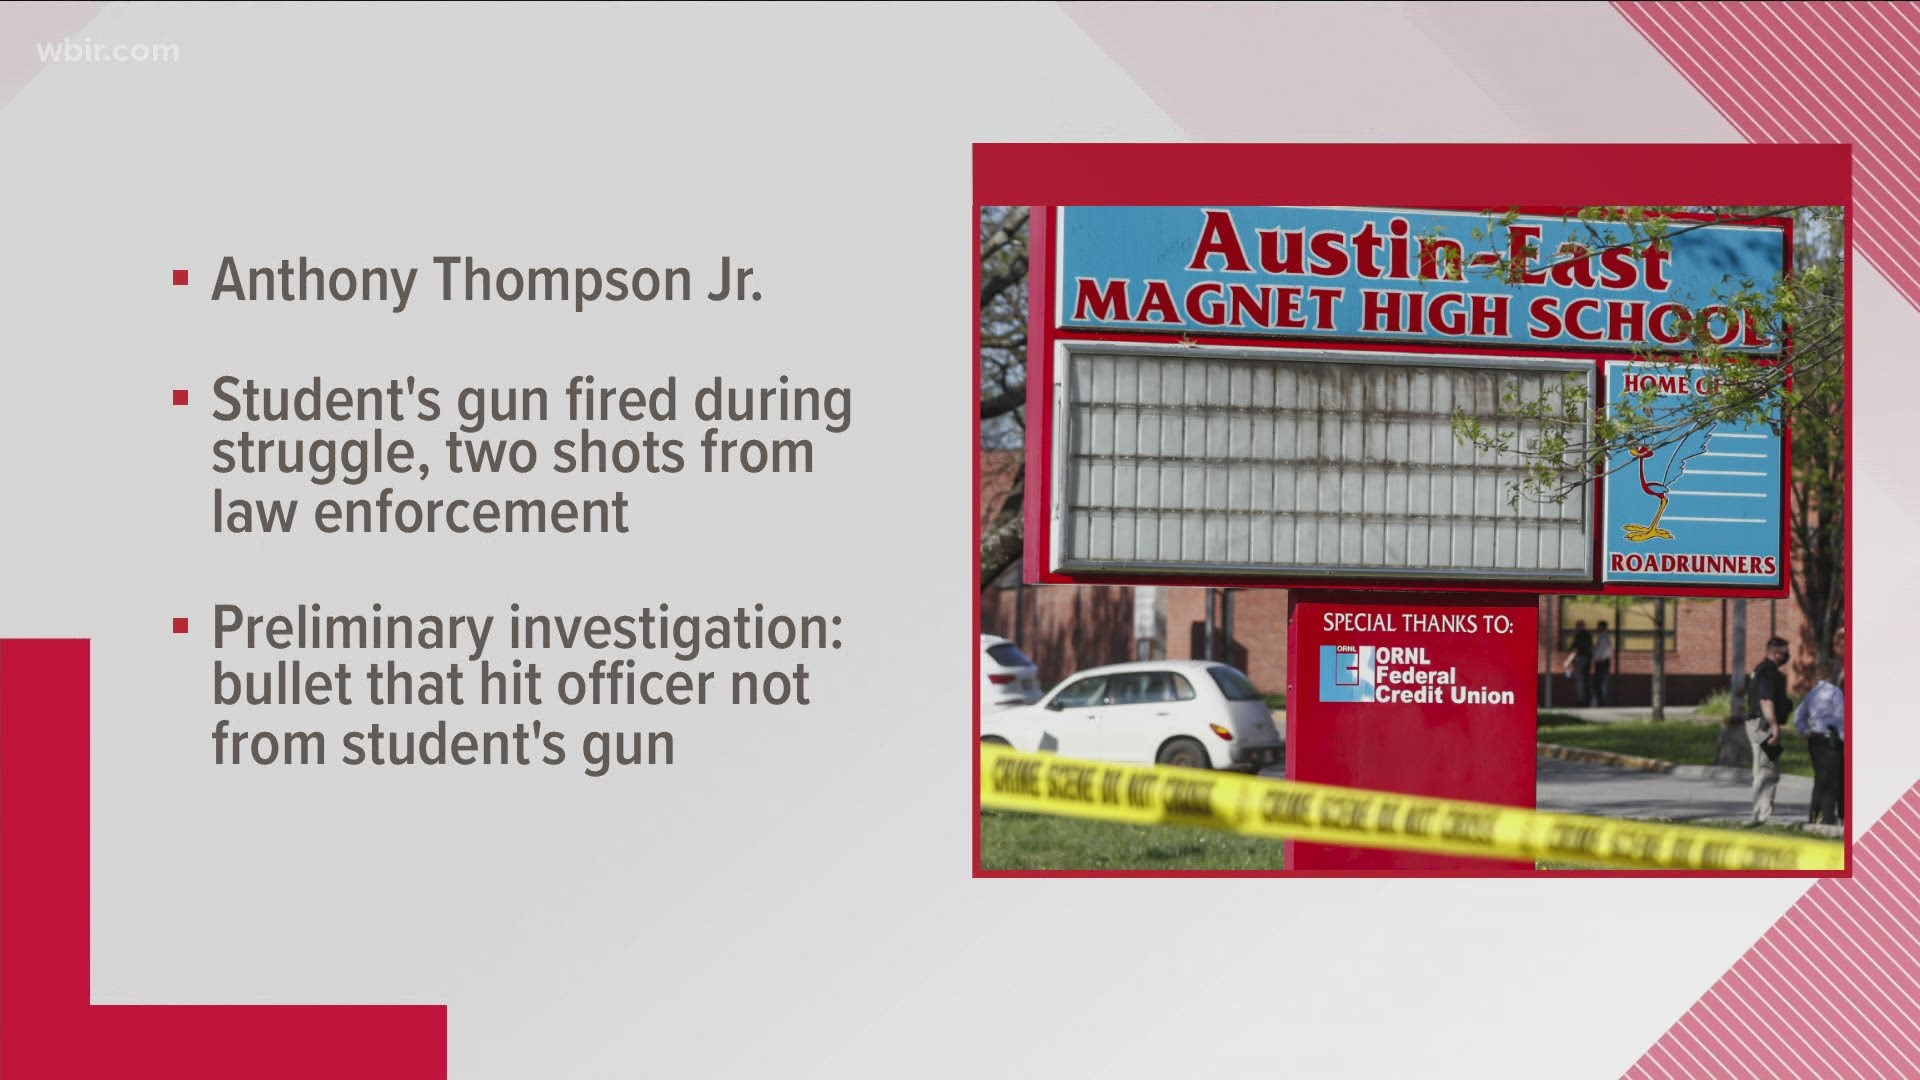 Agents said Anthony Thompson Jr, 17, was killed. Agents said preliminary investigation shows the bullet that hit the KPD officer did not come from the student's gun.